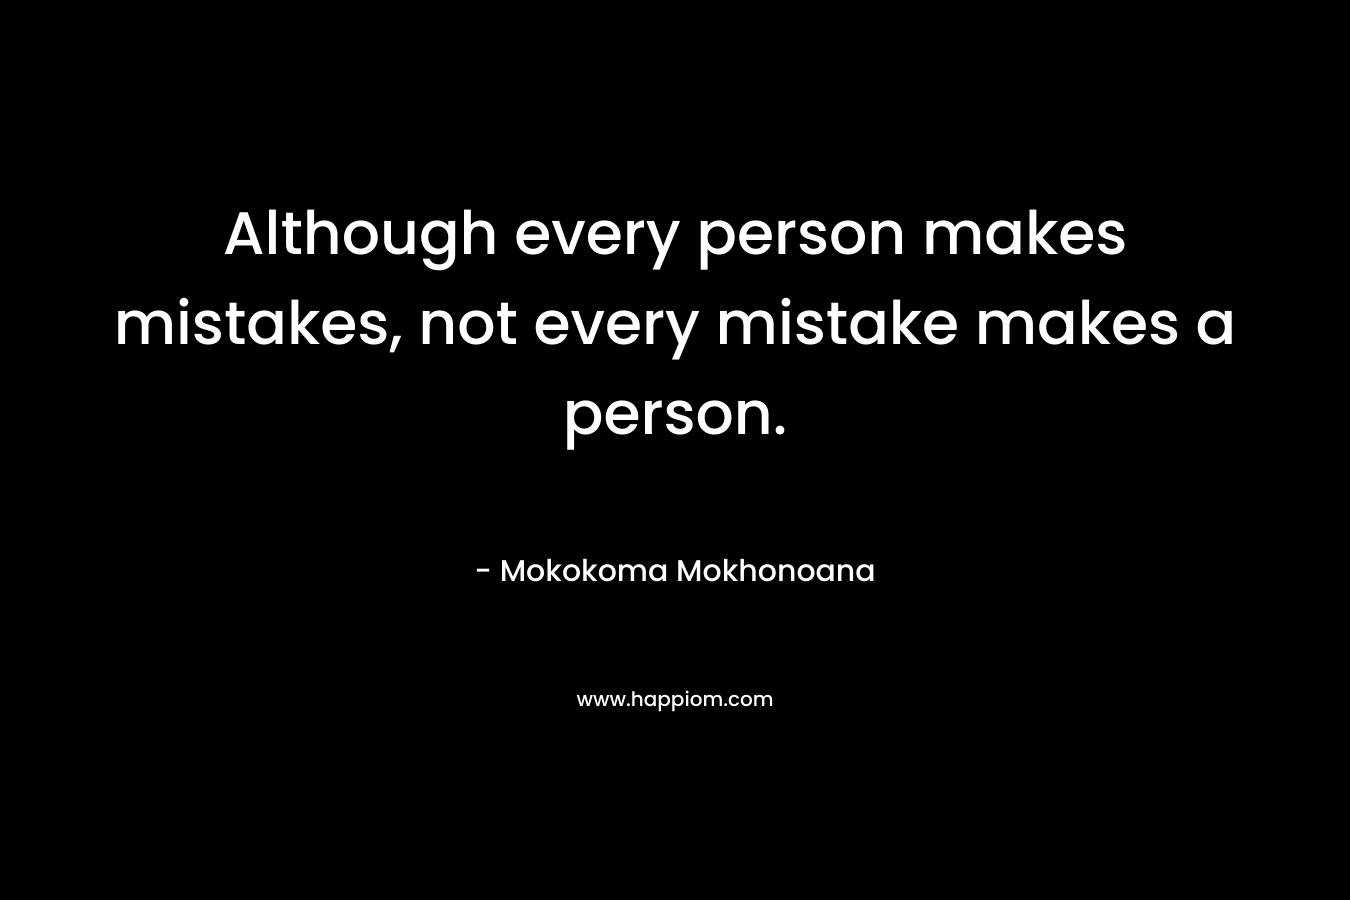 Although every person makes mistakes, not every mistake makes a person.